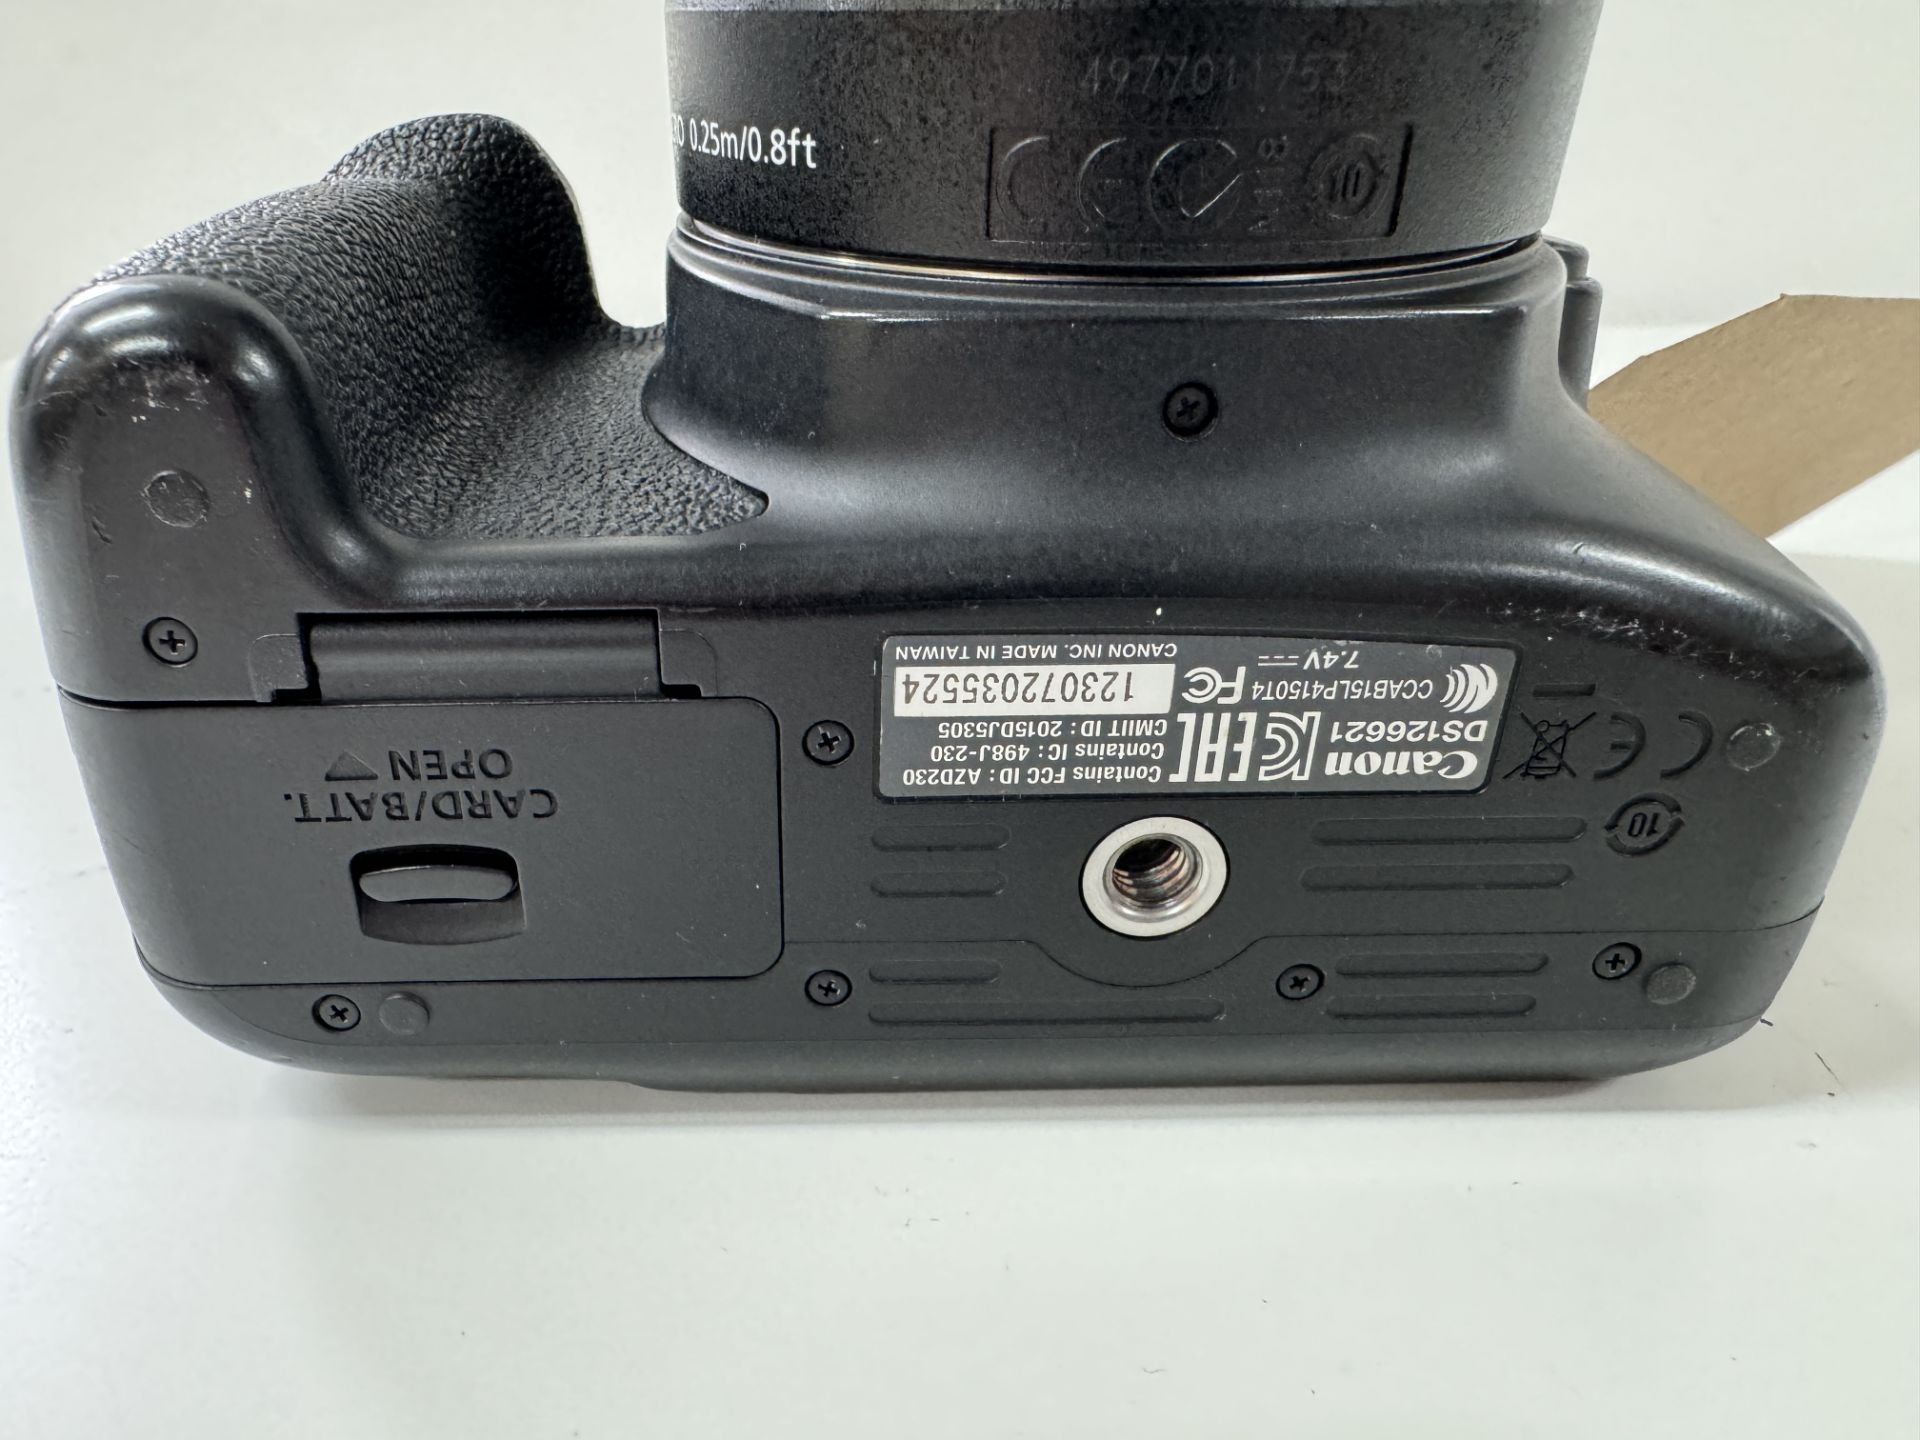 Canon DS12662 DSLR Camera, Serial Number 123072035524 with Canon Zoom Lens EF-S 18-55mm 1:3.5-5.6 - Image 3 of 4